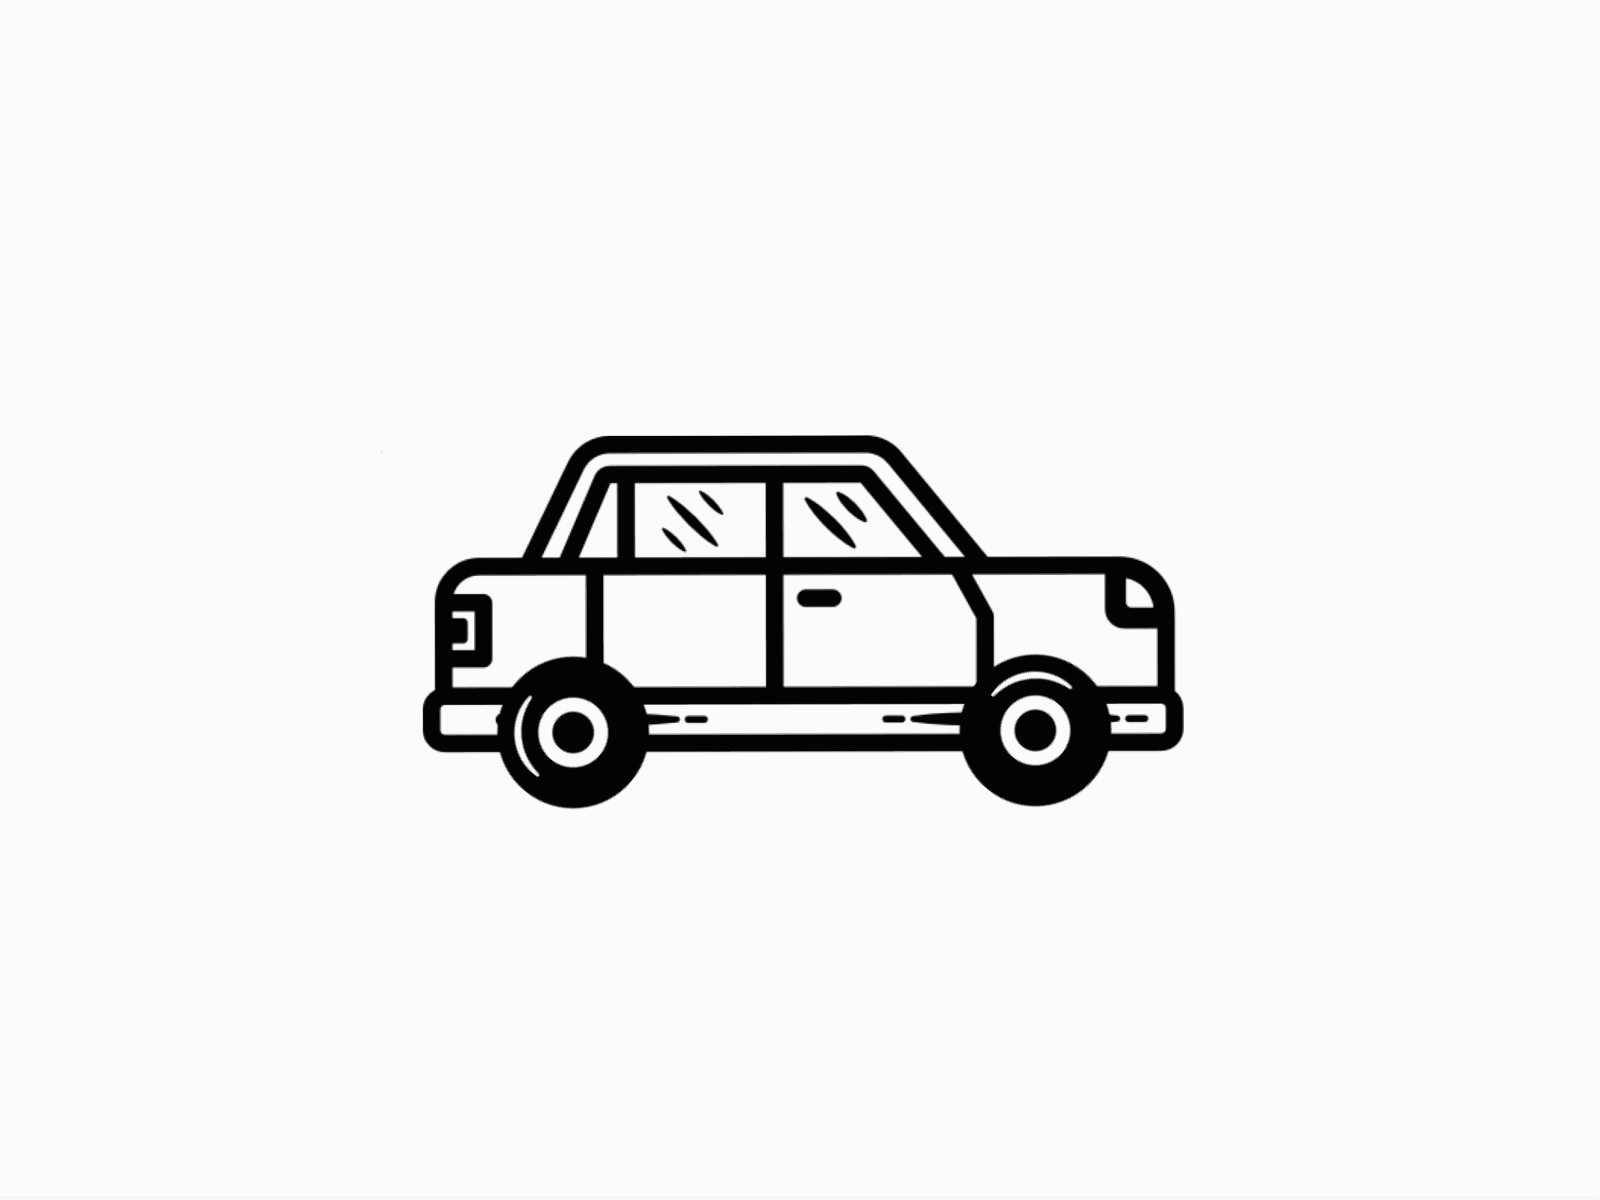 Car Loading Animation by Guillermo González on Dribbble